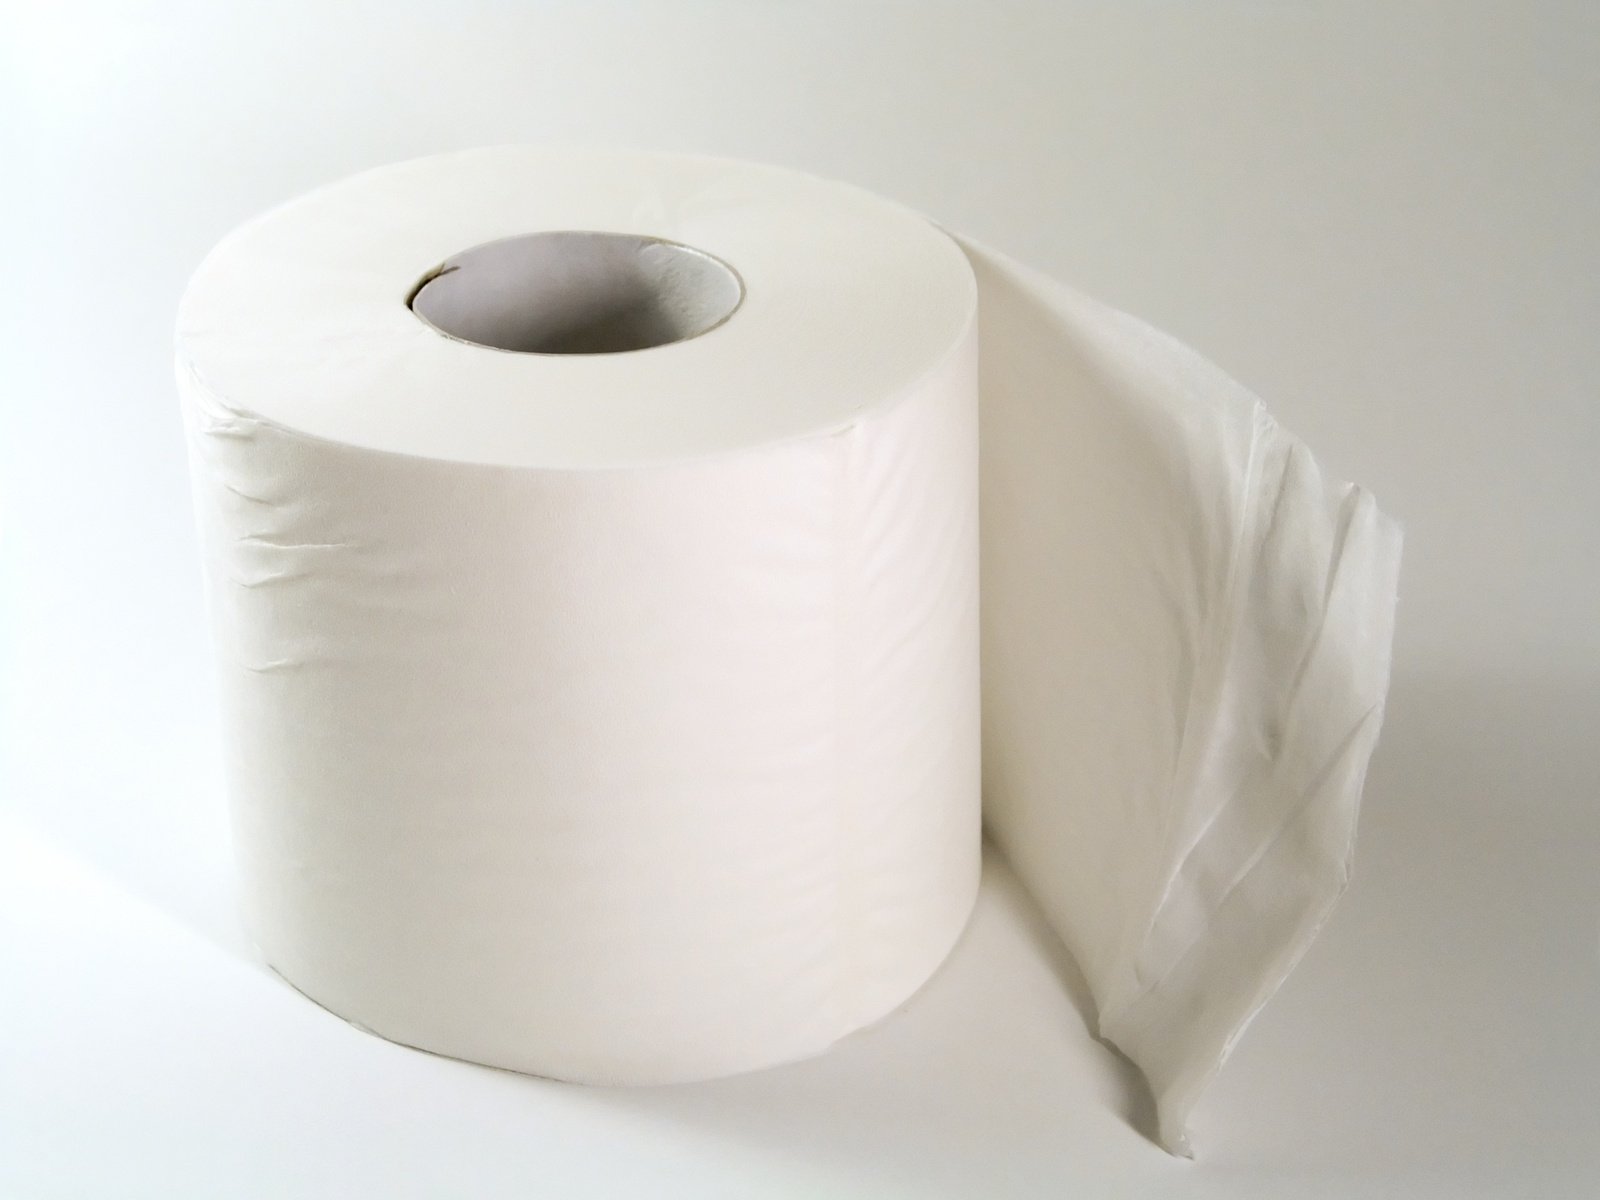 toilet roll with a large white roll of tissue